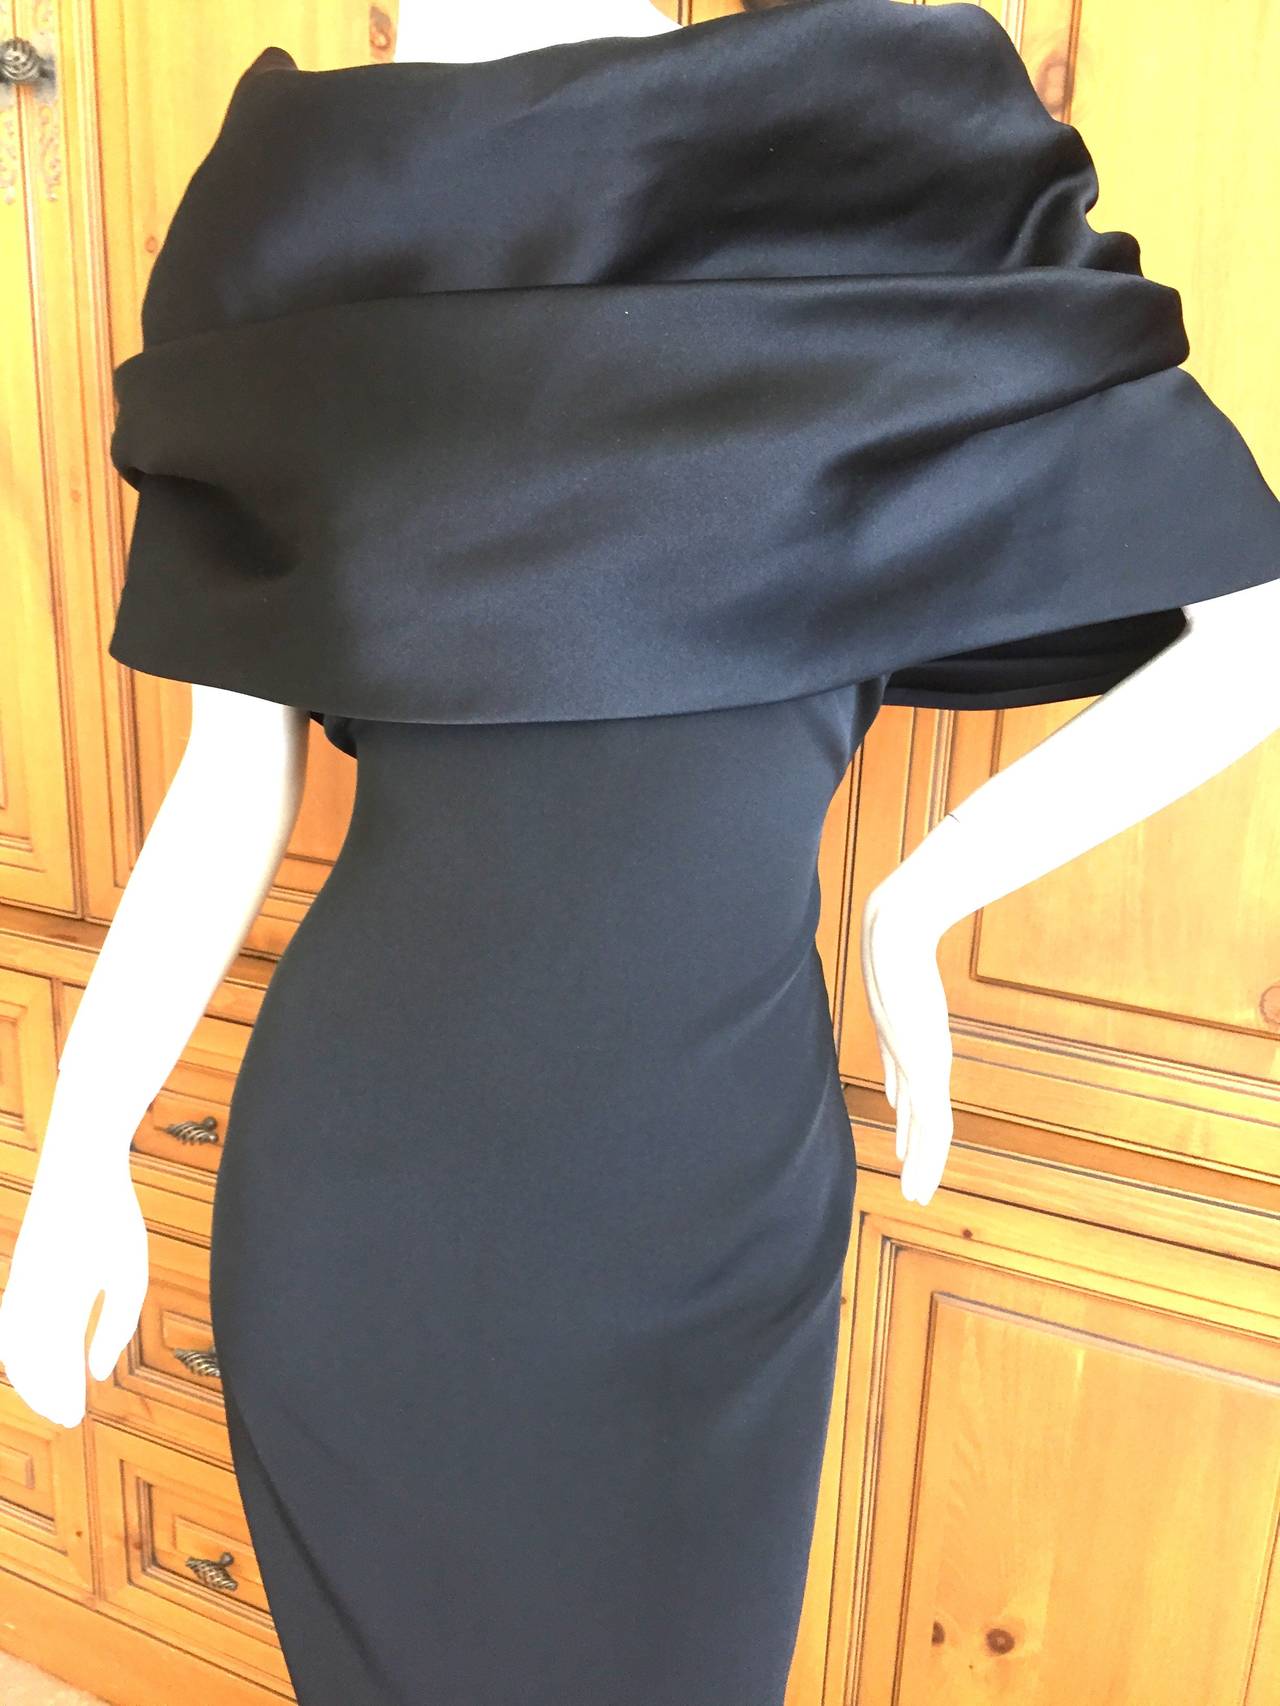 Bill Blass Lovely 1970's Black Sleeveless Dress with Attached Capelet / Stole
This is so elegant, Blass at his best, ladylike with understated glamour
Appx sz 6-8 
Bust 38